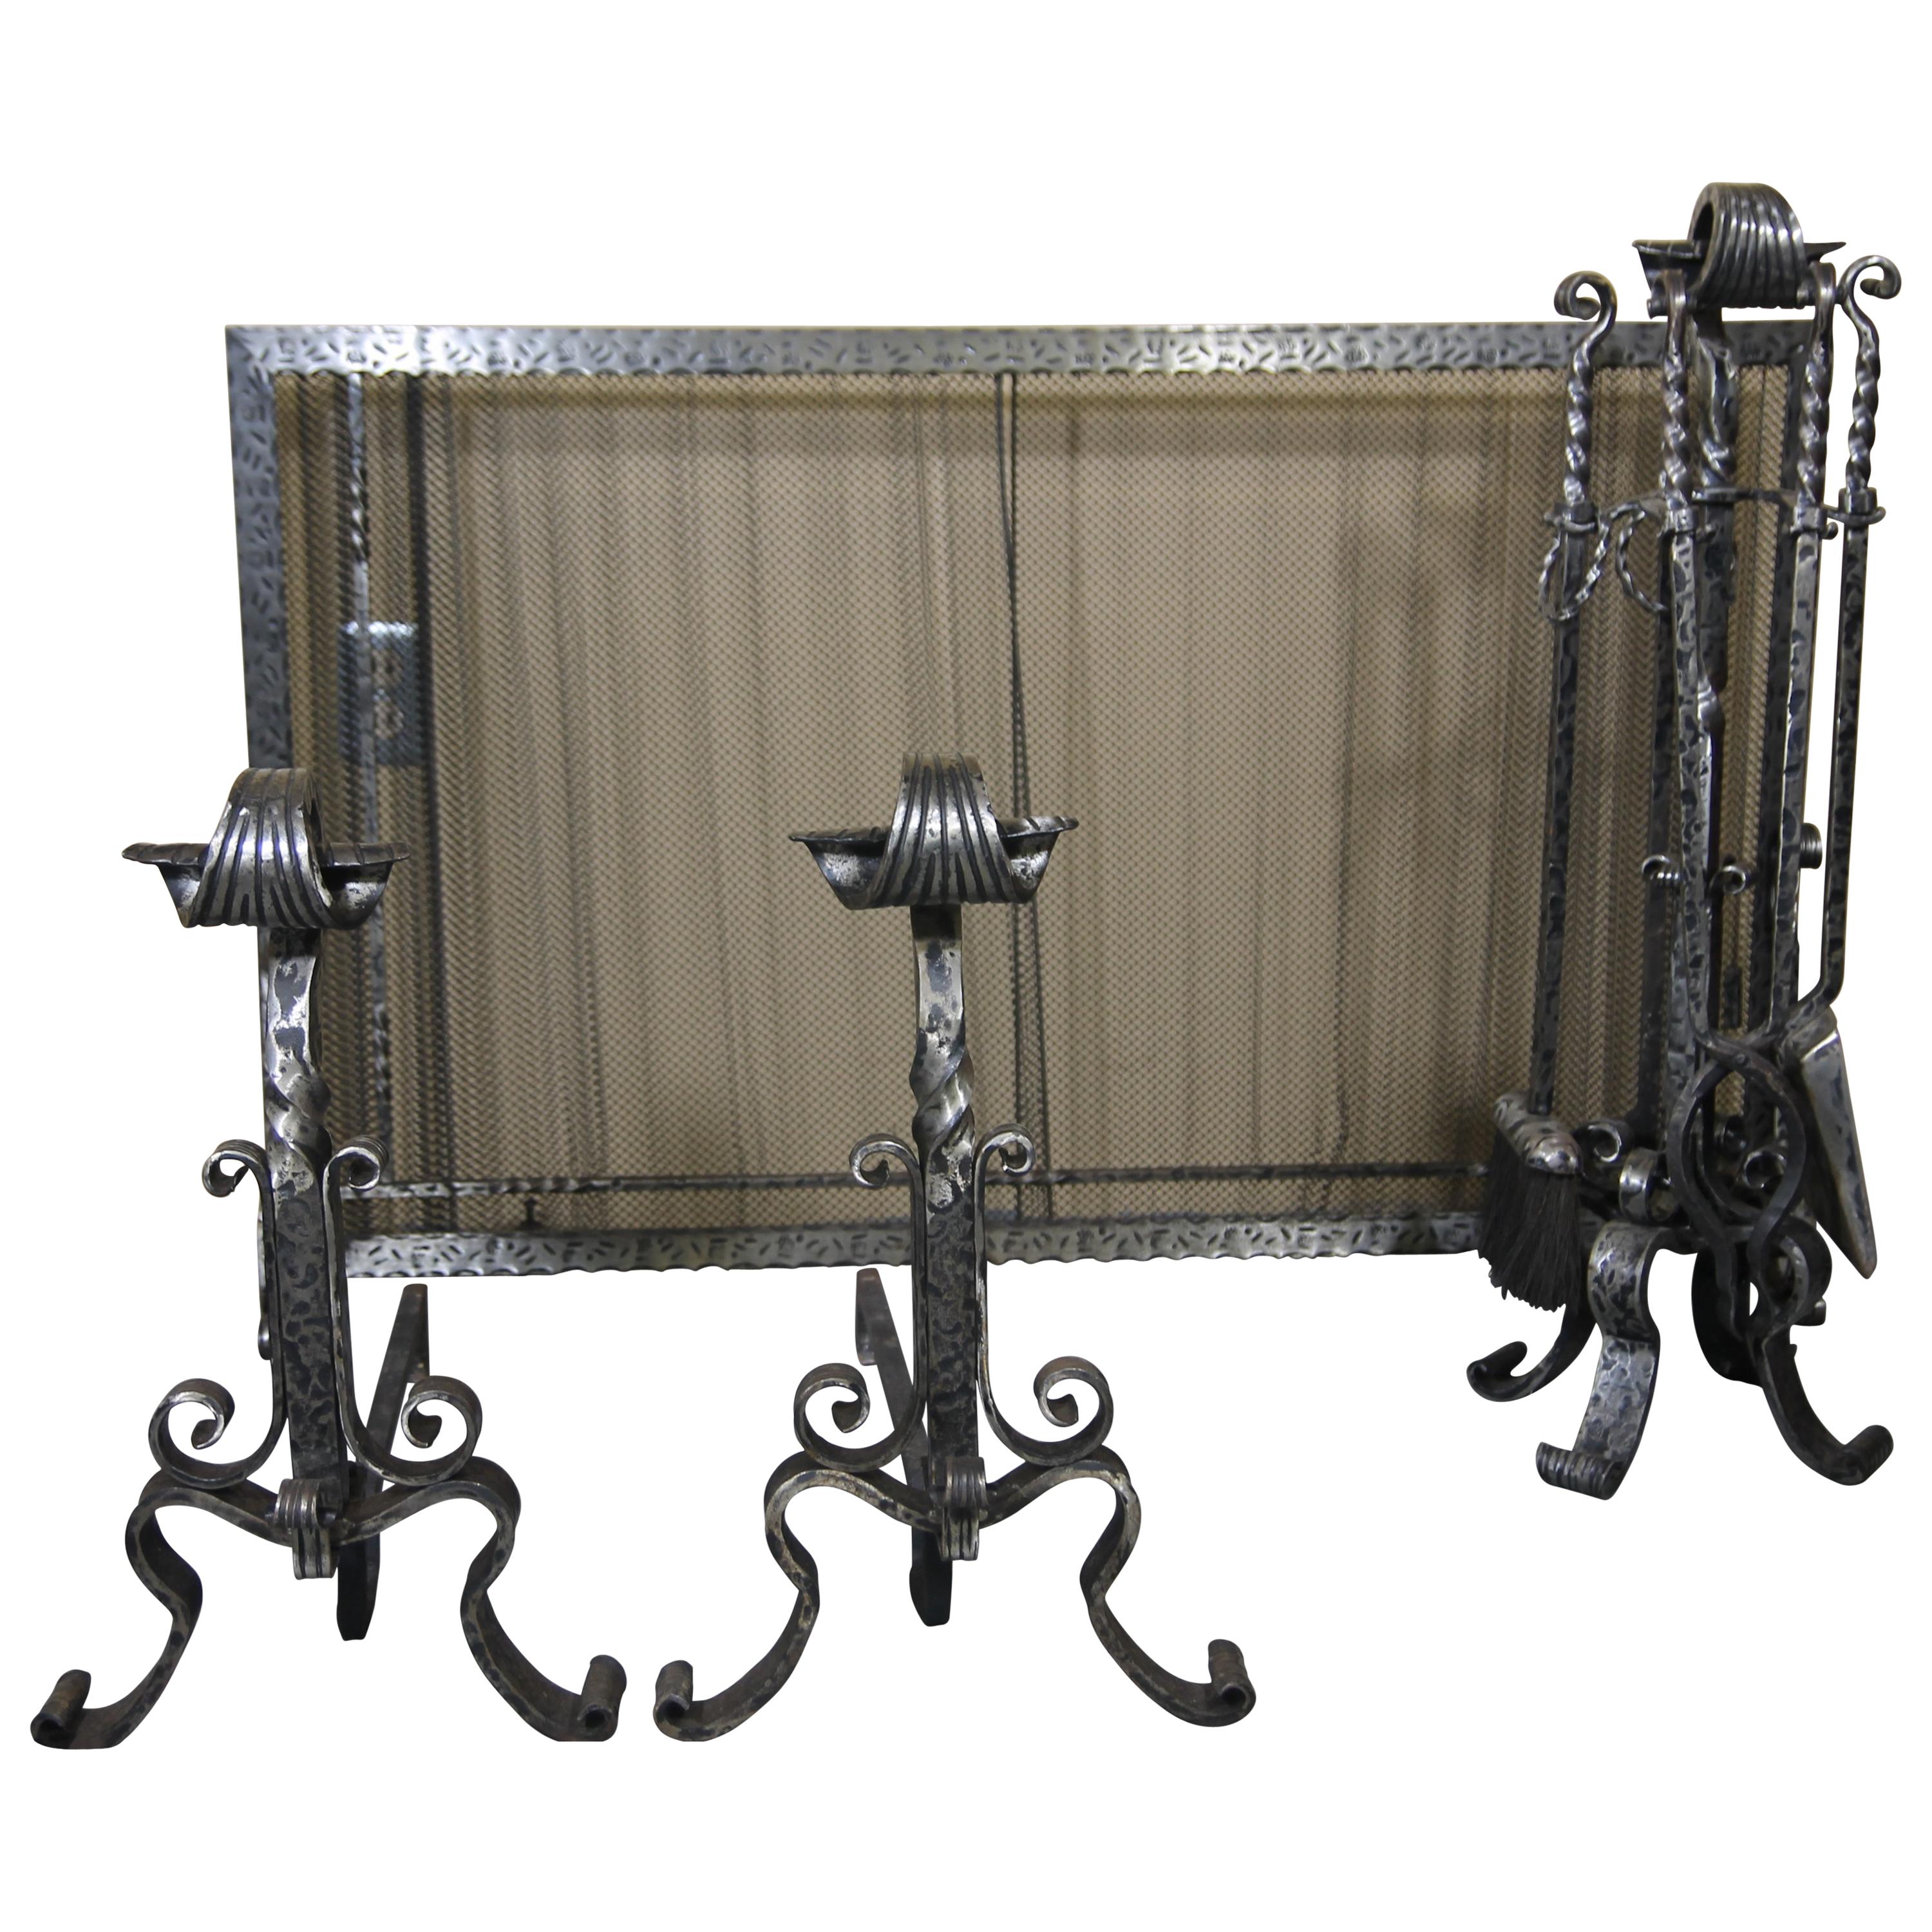 Hand Forged Wrought Iron Fireplace Set Made Up of Screen, Tools and Andirons